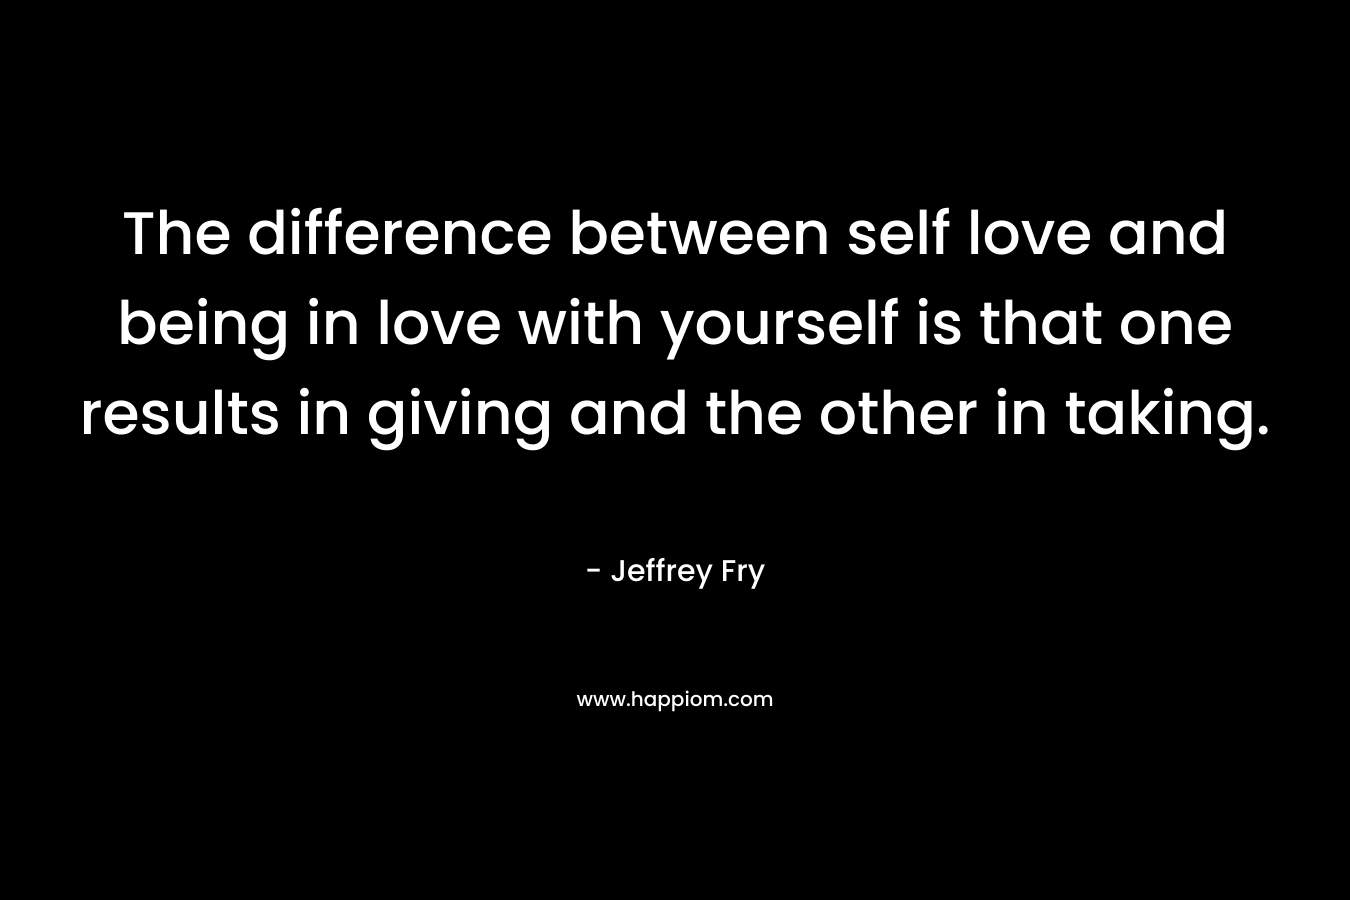 The difference between self love and being in love with yourself is that one results in giving and the other in taking.